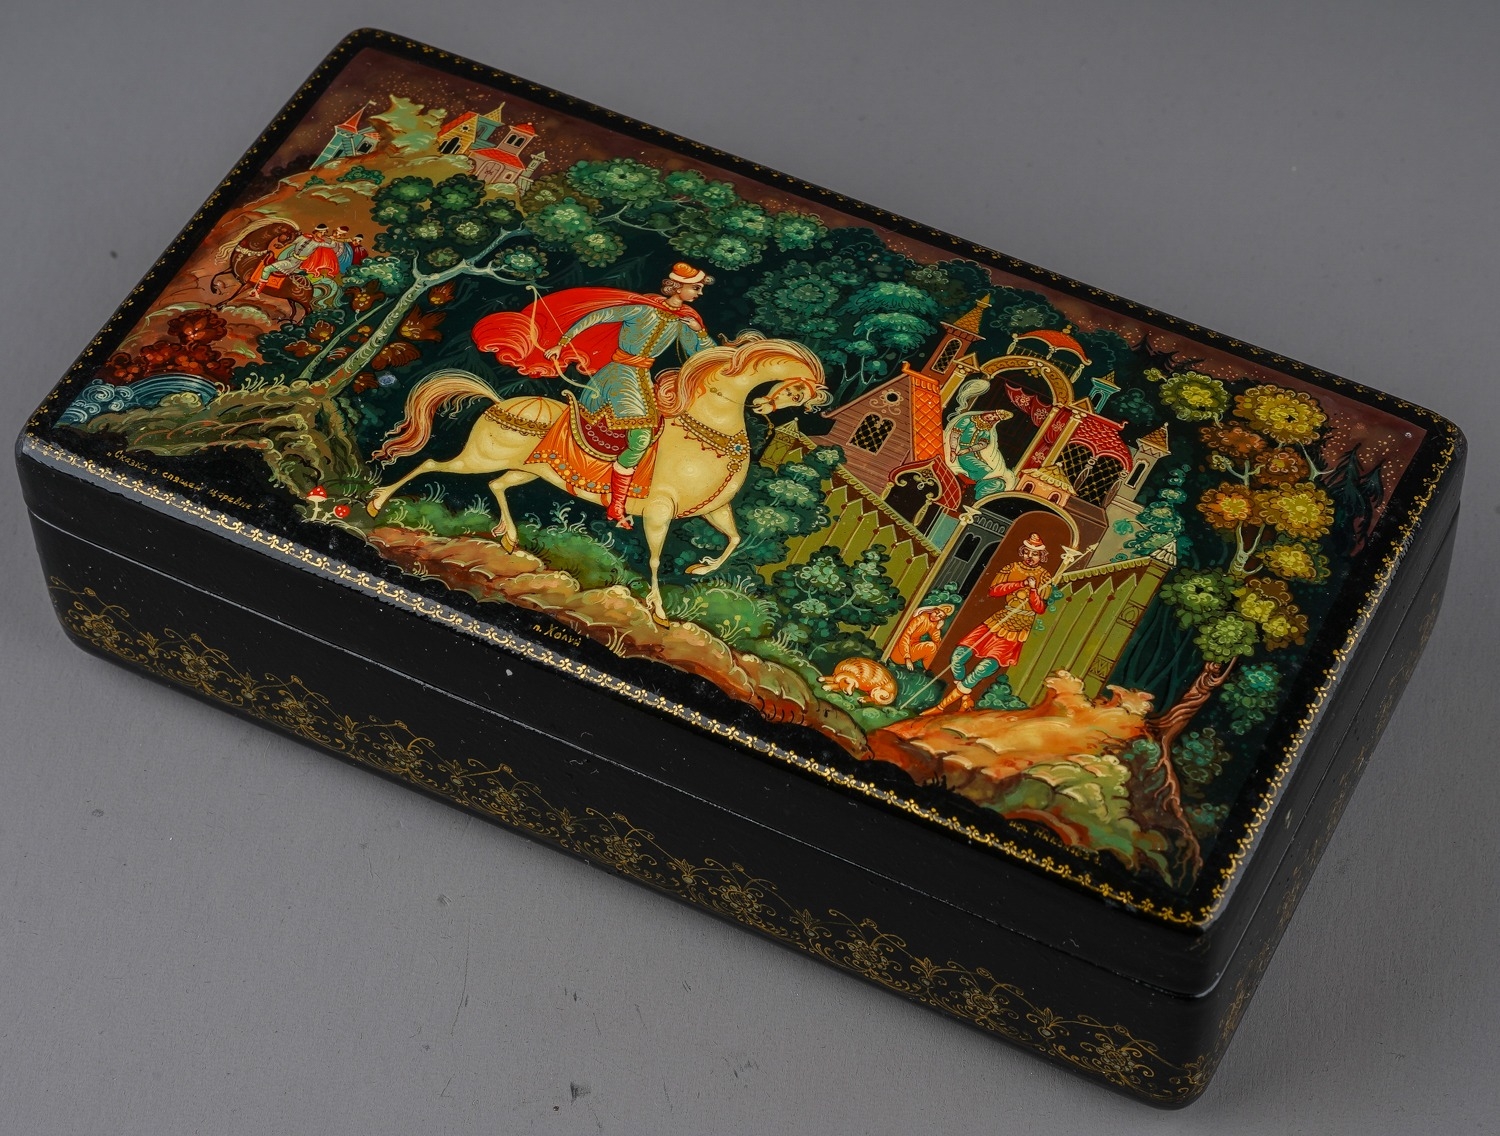 Soviet era Russian hand painted lacquered box, signed to lower right and left and marked made in